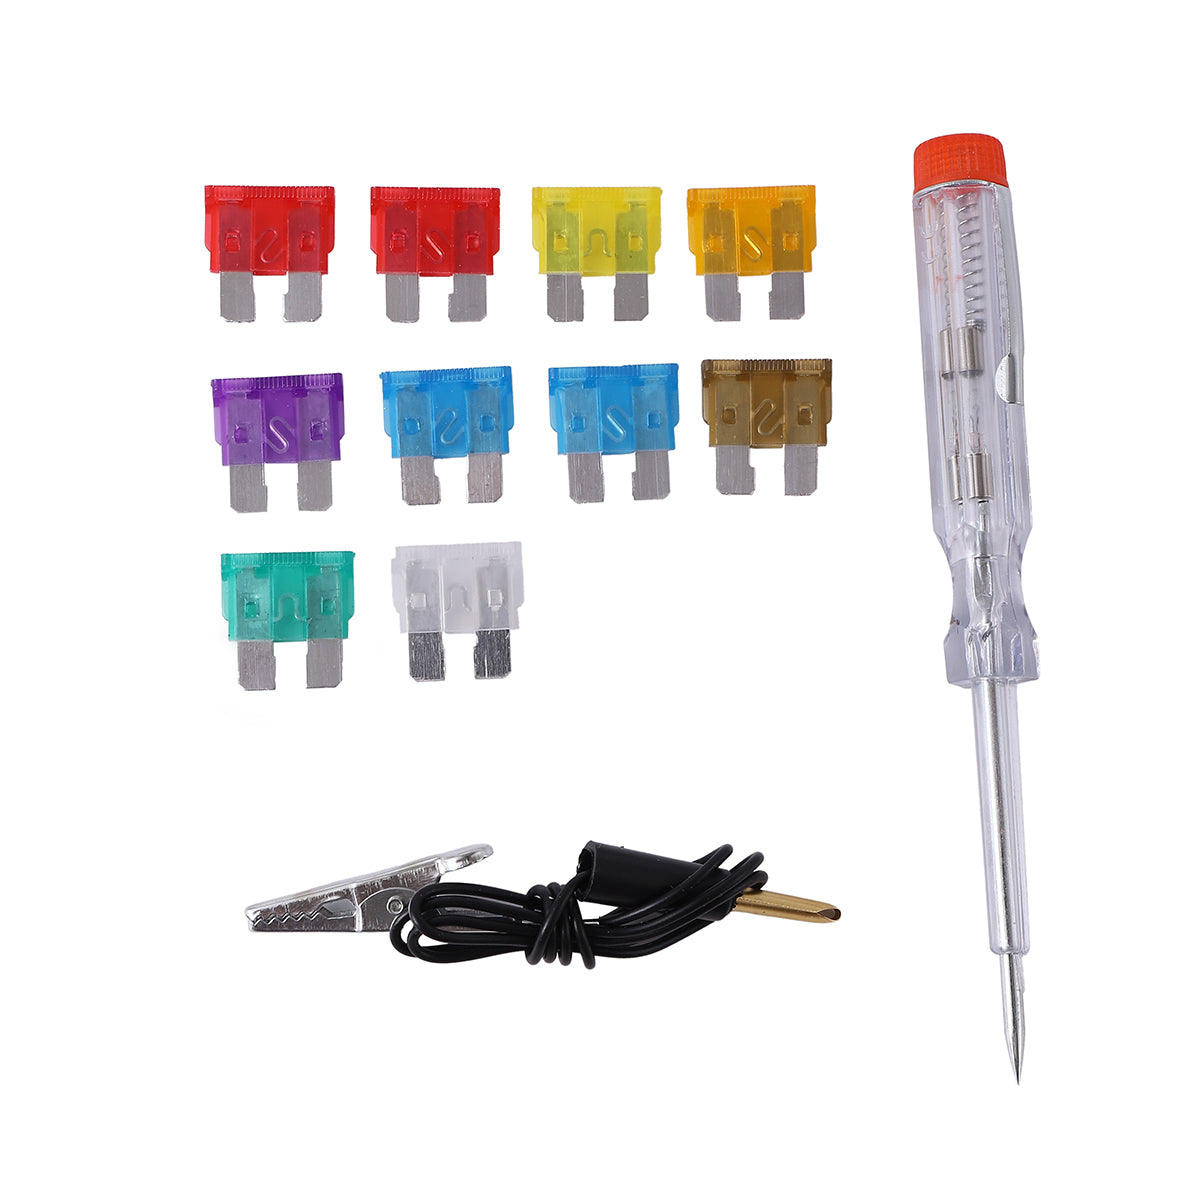 12-Piece Auto Plug In Fuse With Tester